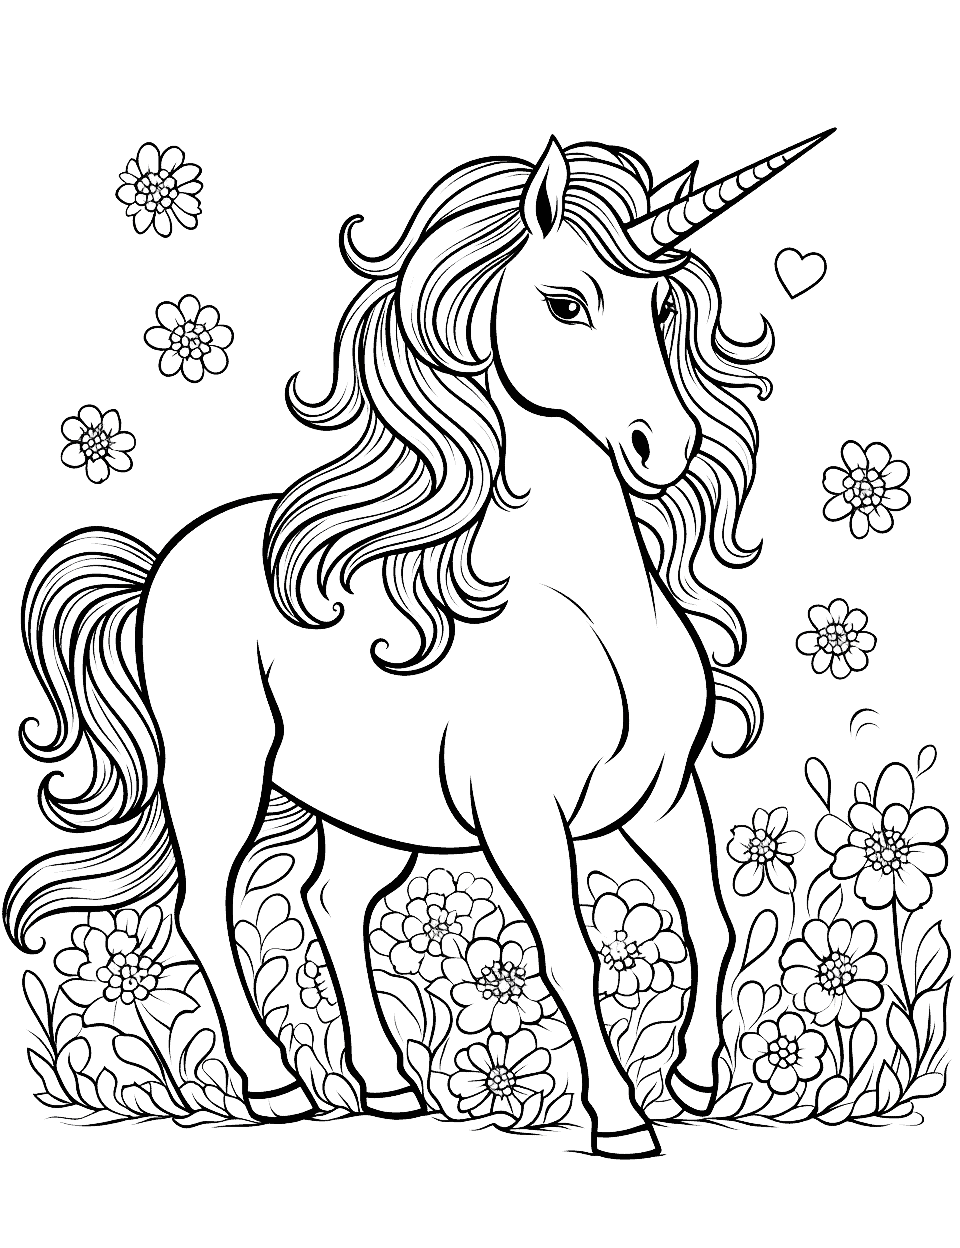 Unicorn Gardening Coloring Page - A unicorn tending to its magical garden full of fantastical plants and flowers.